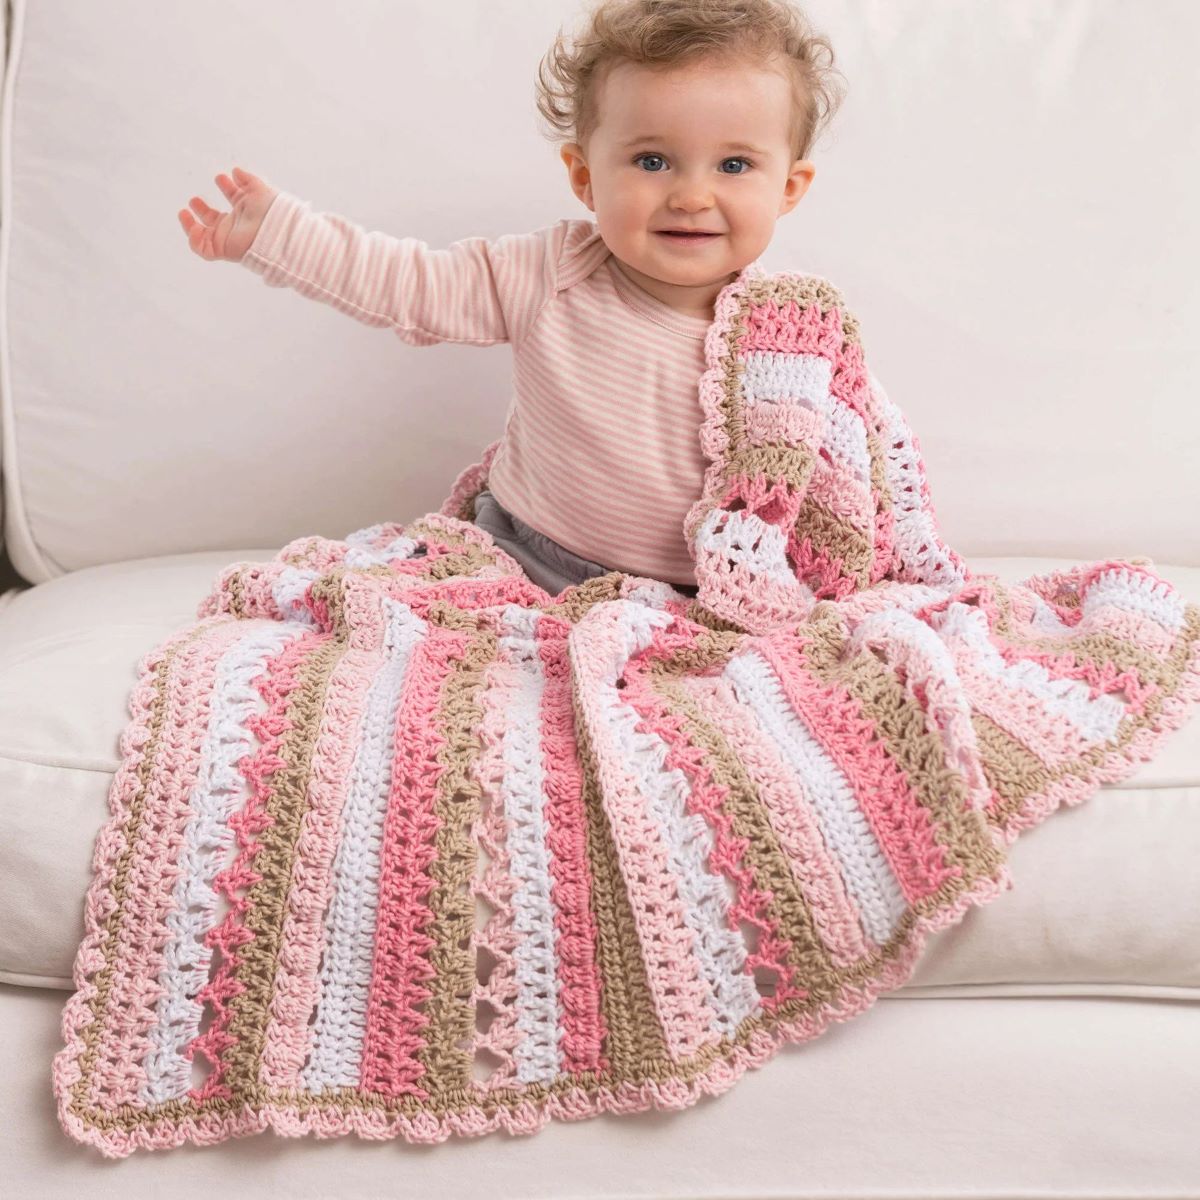 How To Add Width To A Finished Crochet Blanket